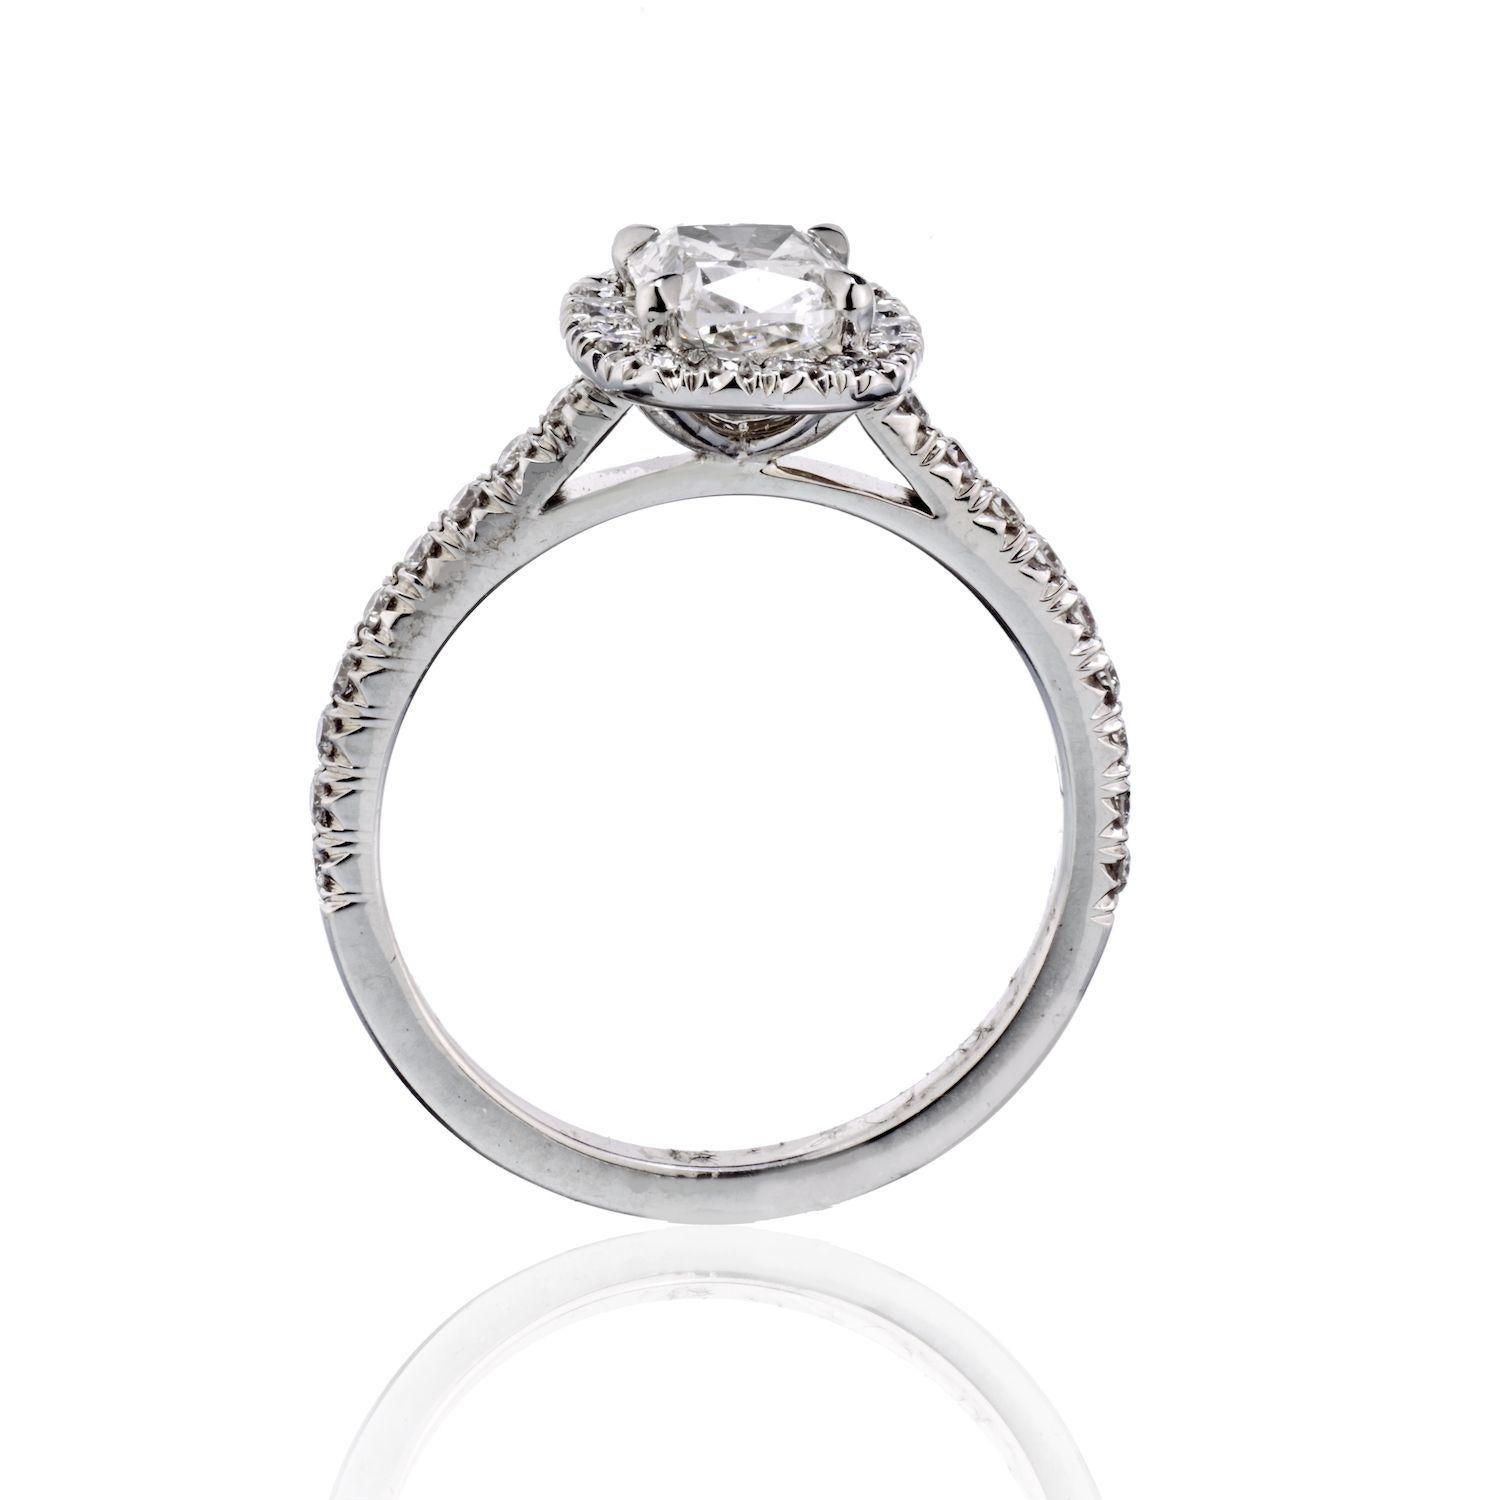 This lovely cushion cut halo set diamond engagement ring features 1.06 carat center dimaond in sparkly round brilliant diamond setting. Round cuts set around the center stone and along the ring's shank. Four prongs securely hold your center stone,